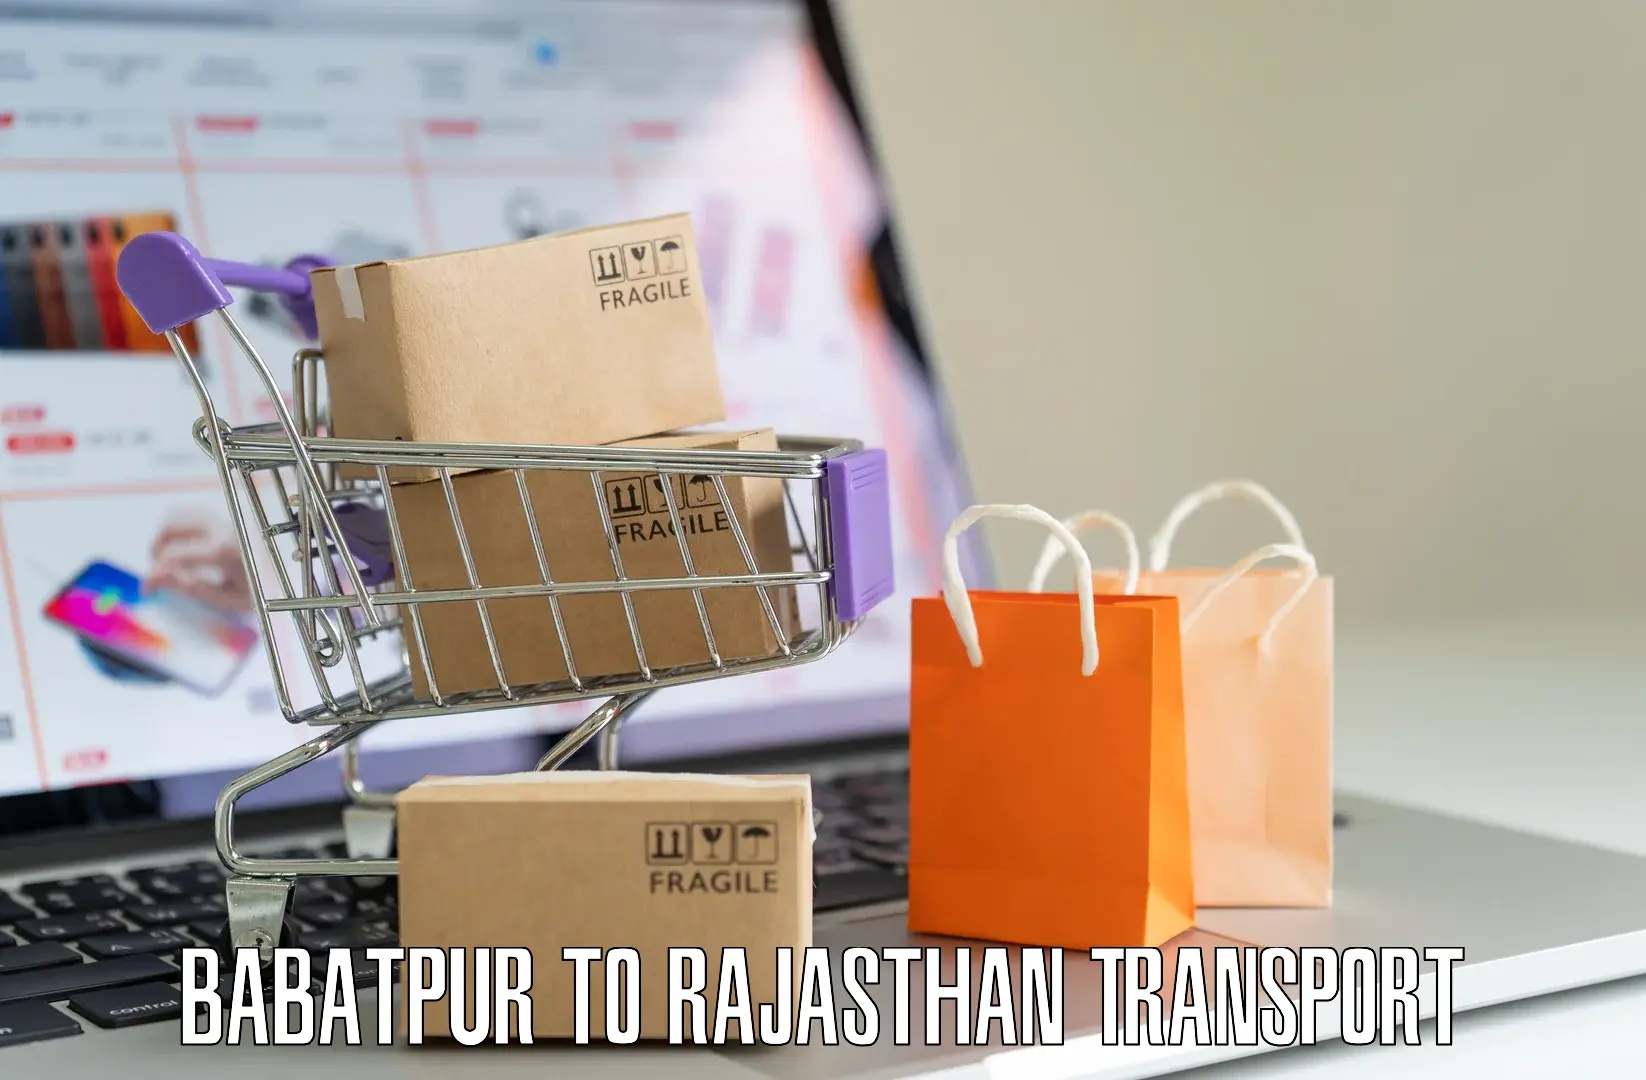 Daily transport service in Babatpur to Bharatpur